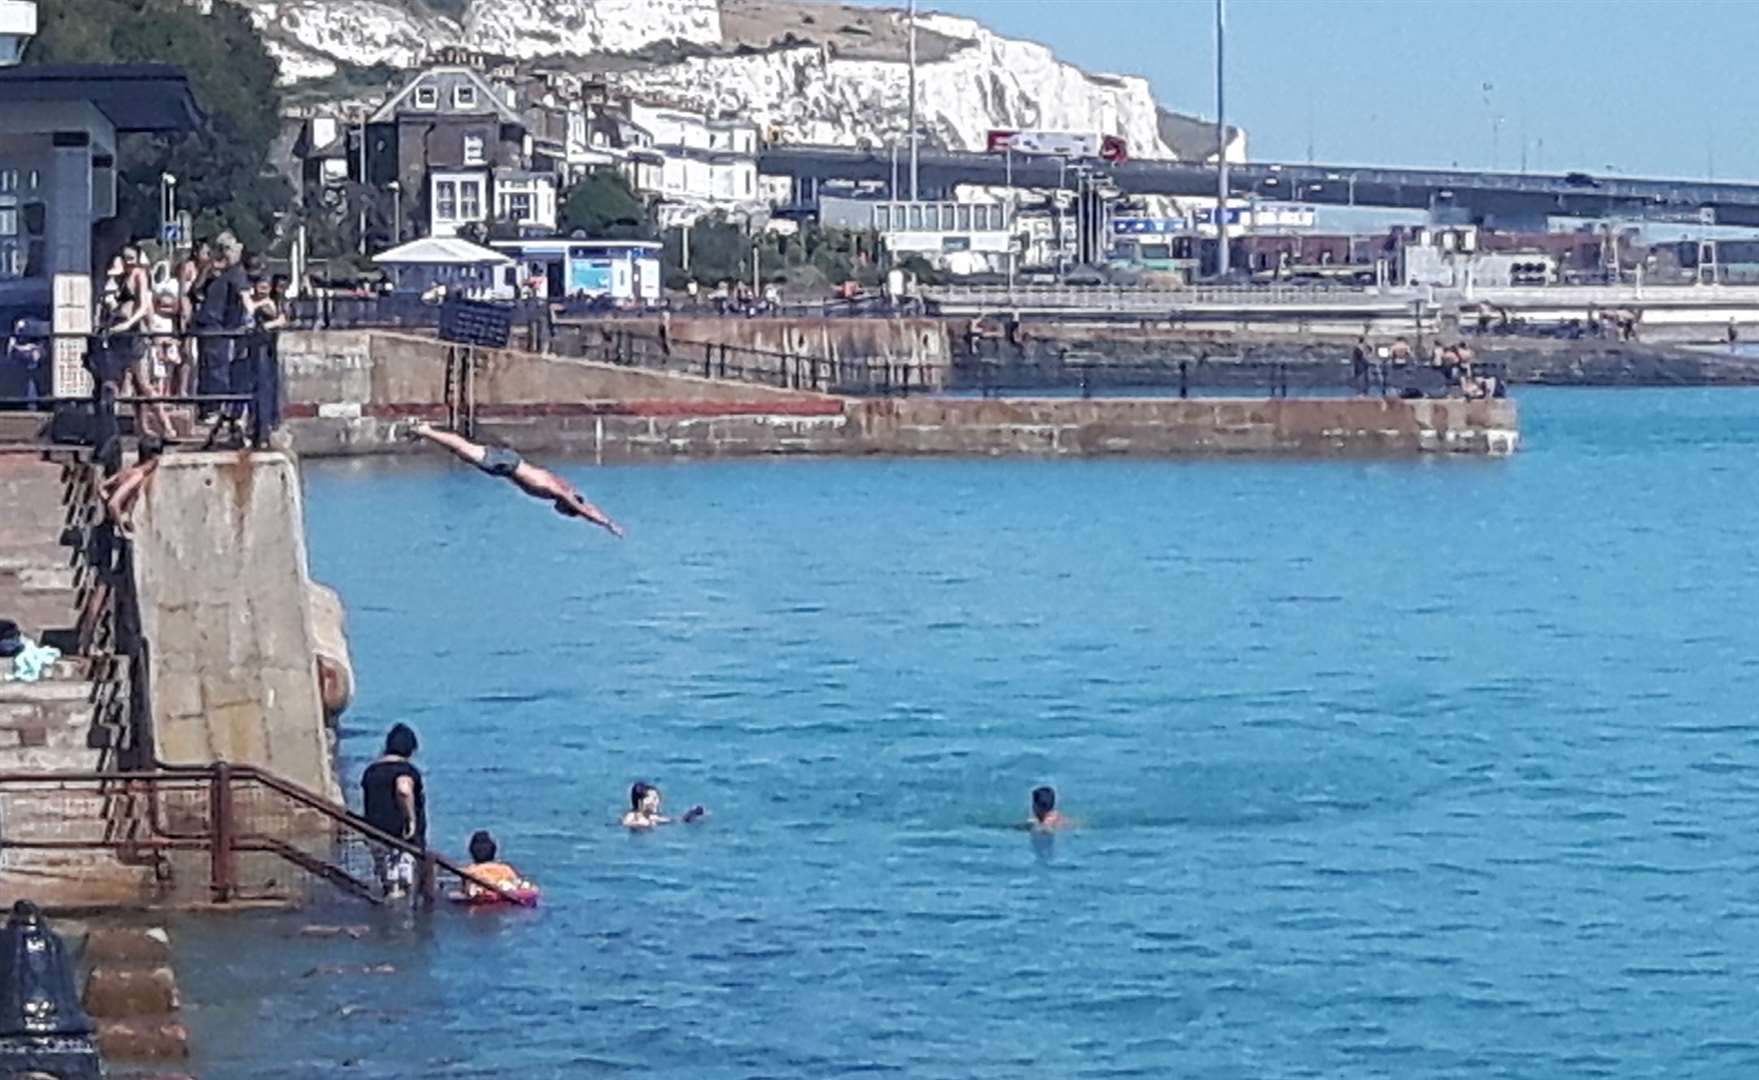 People have been spotted jumping into the water